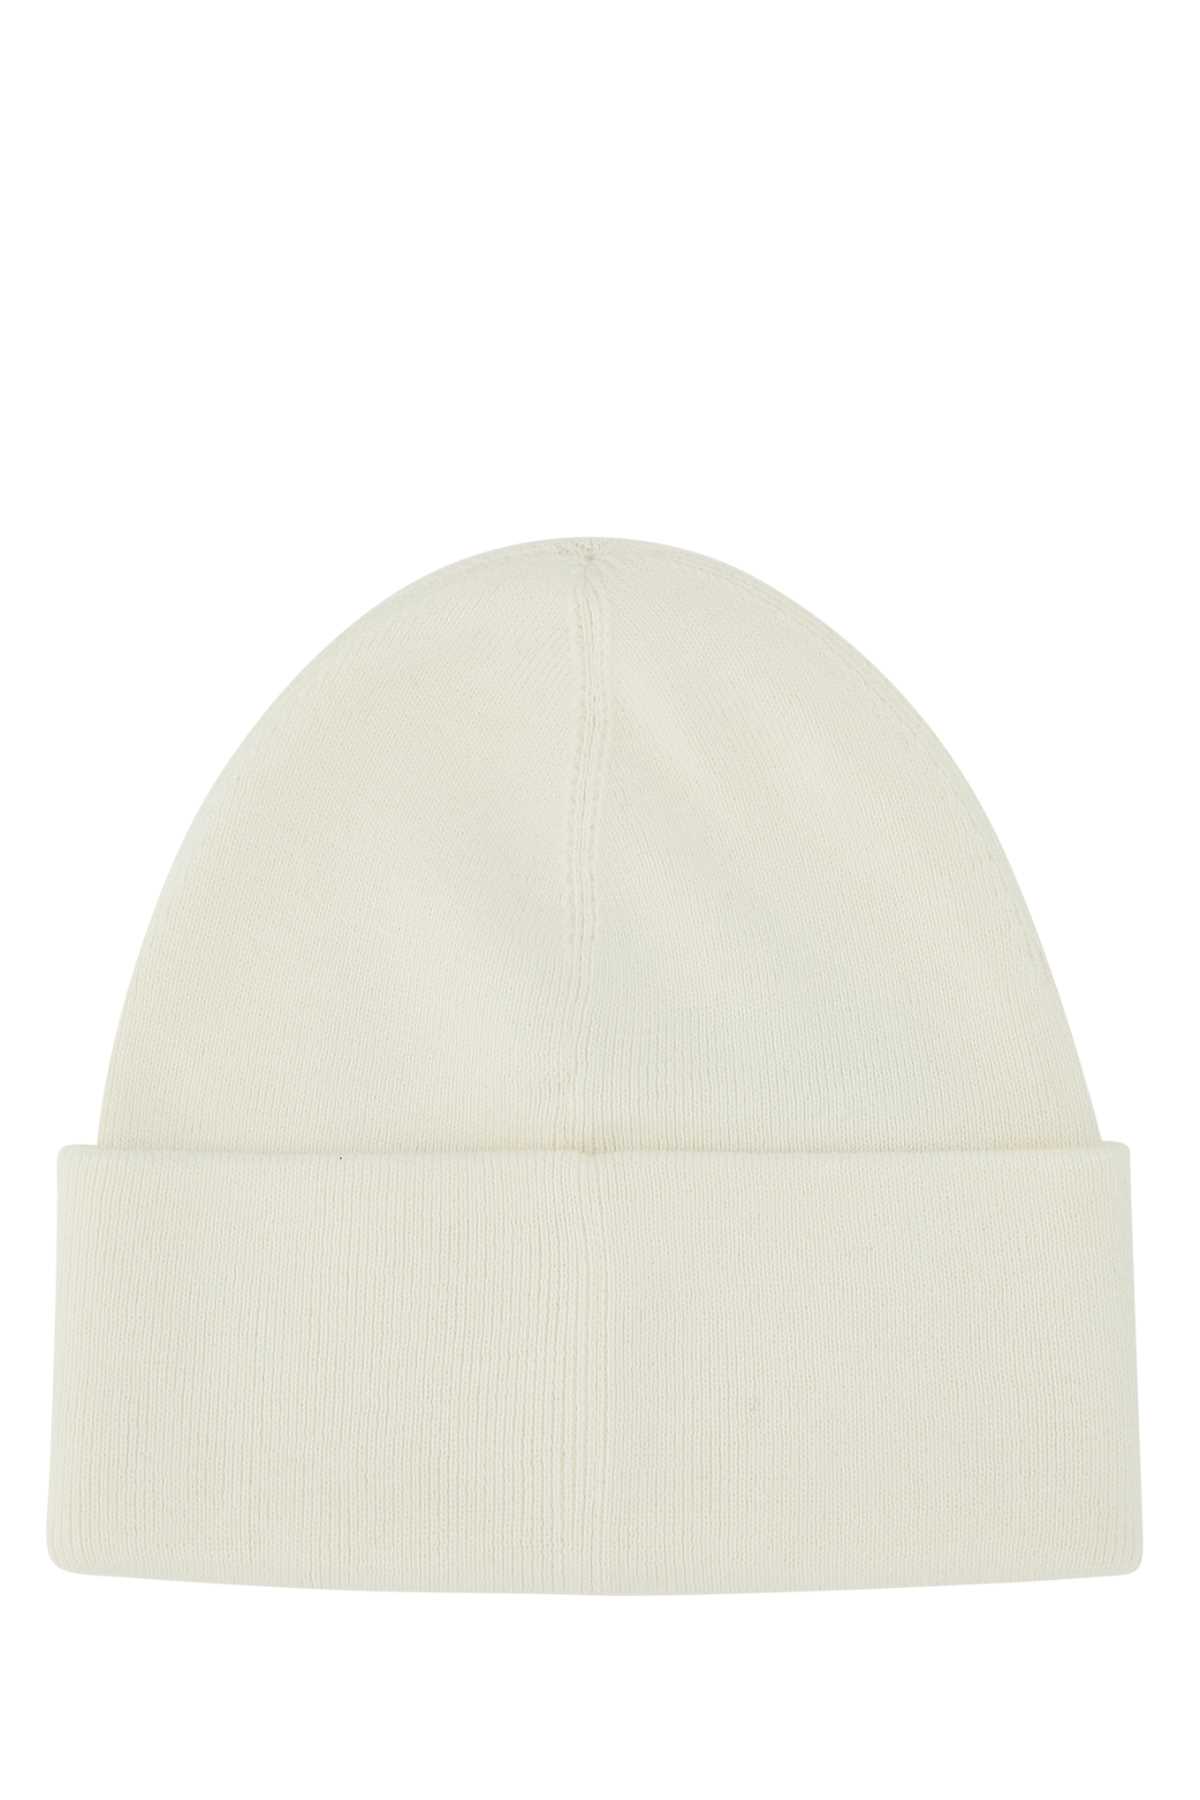 Fred Perry Ivory Acrylic Blend Beanie Hat In 129